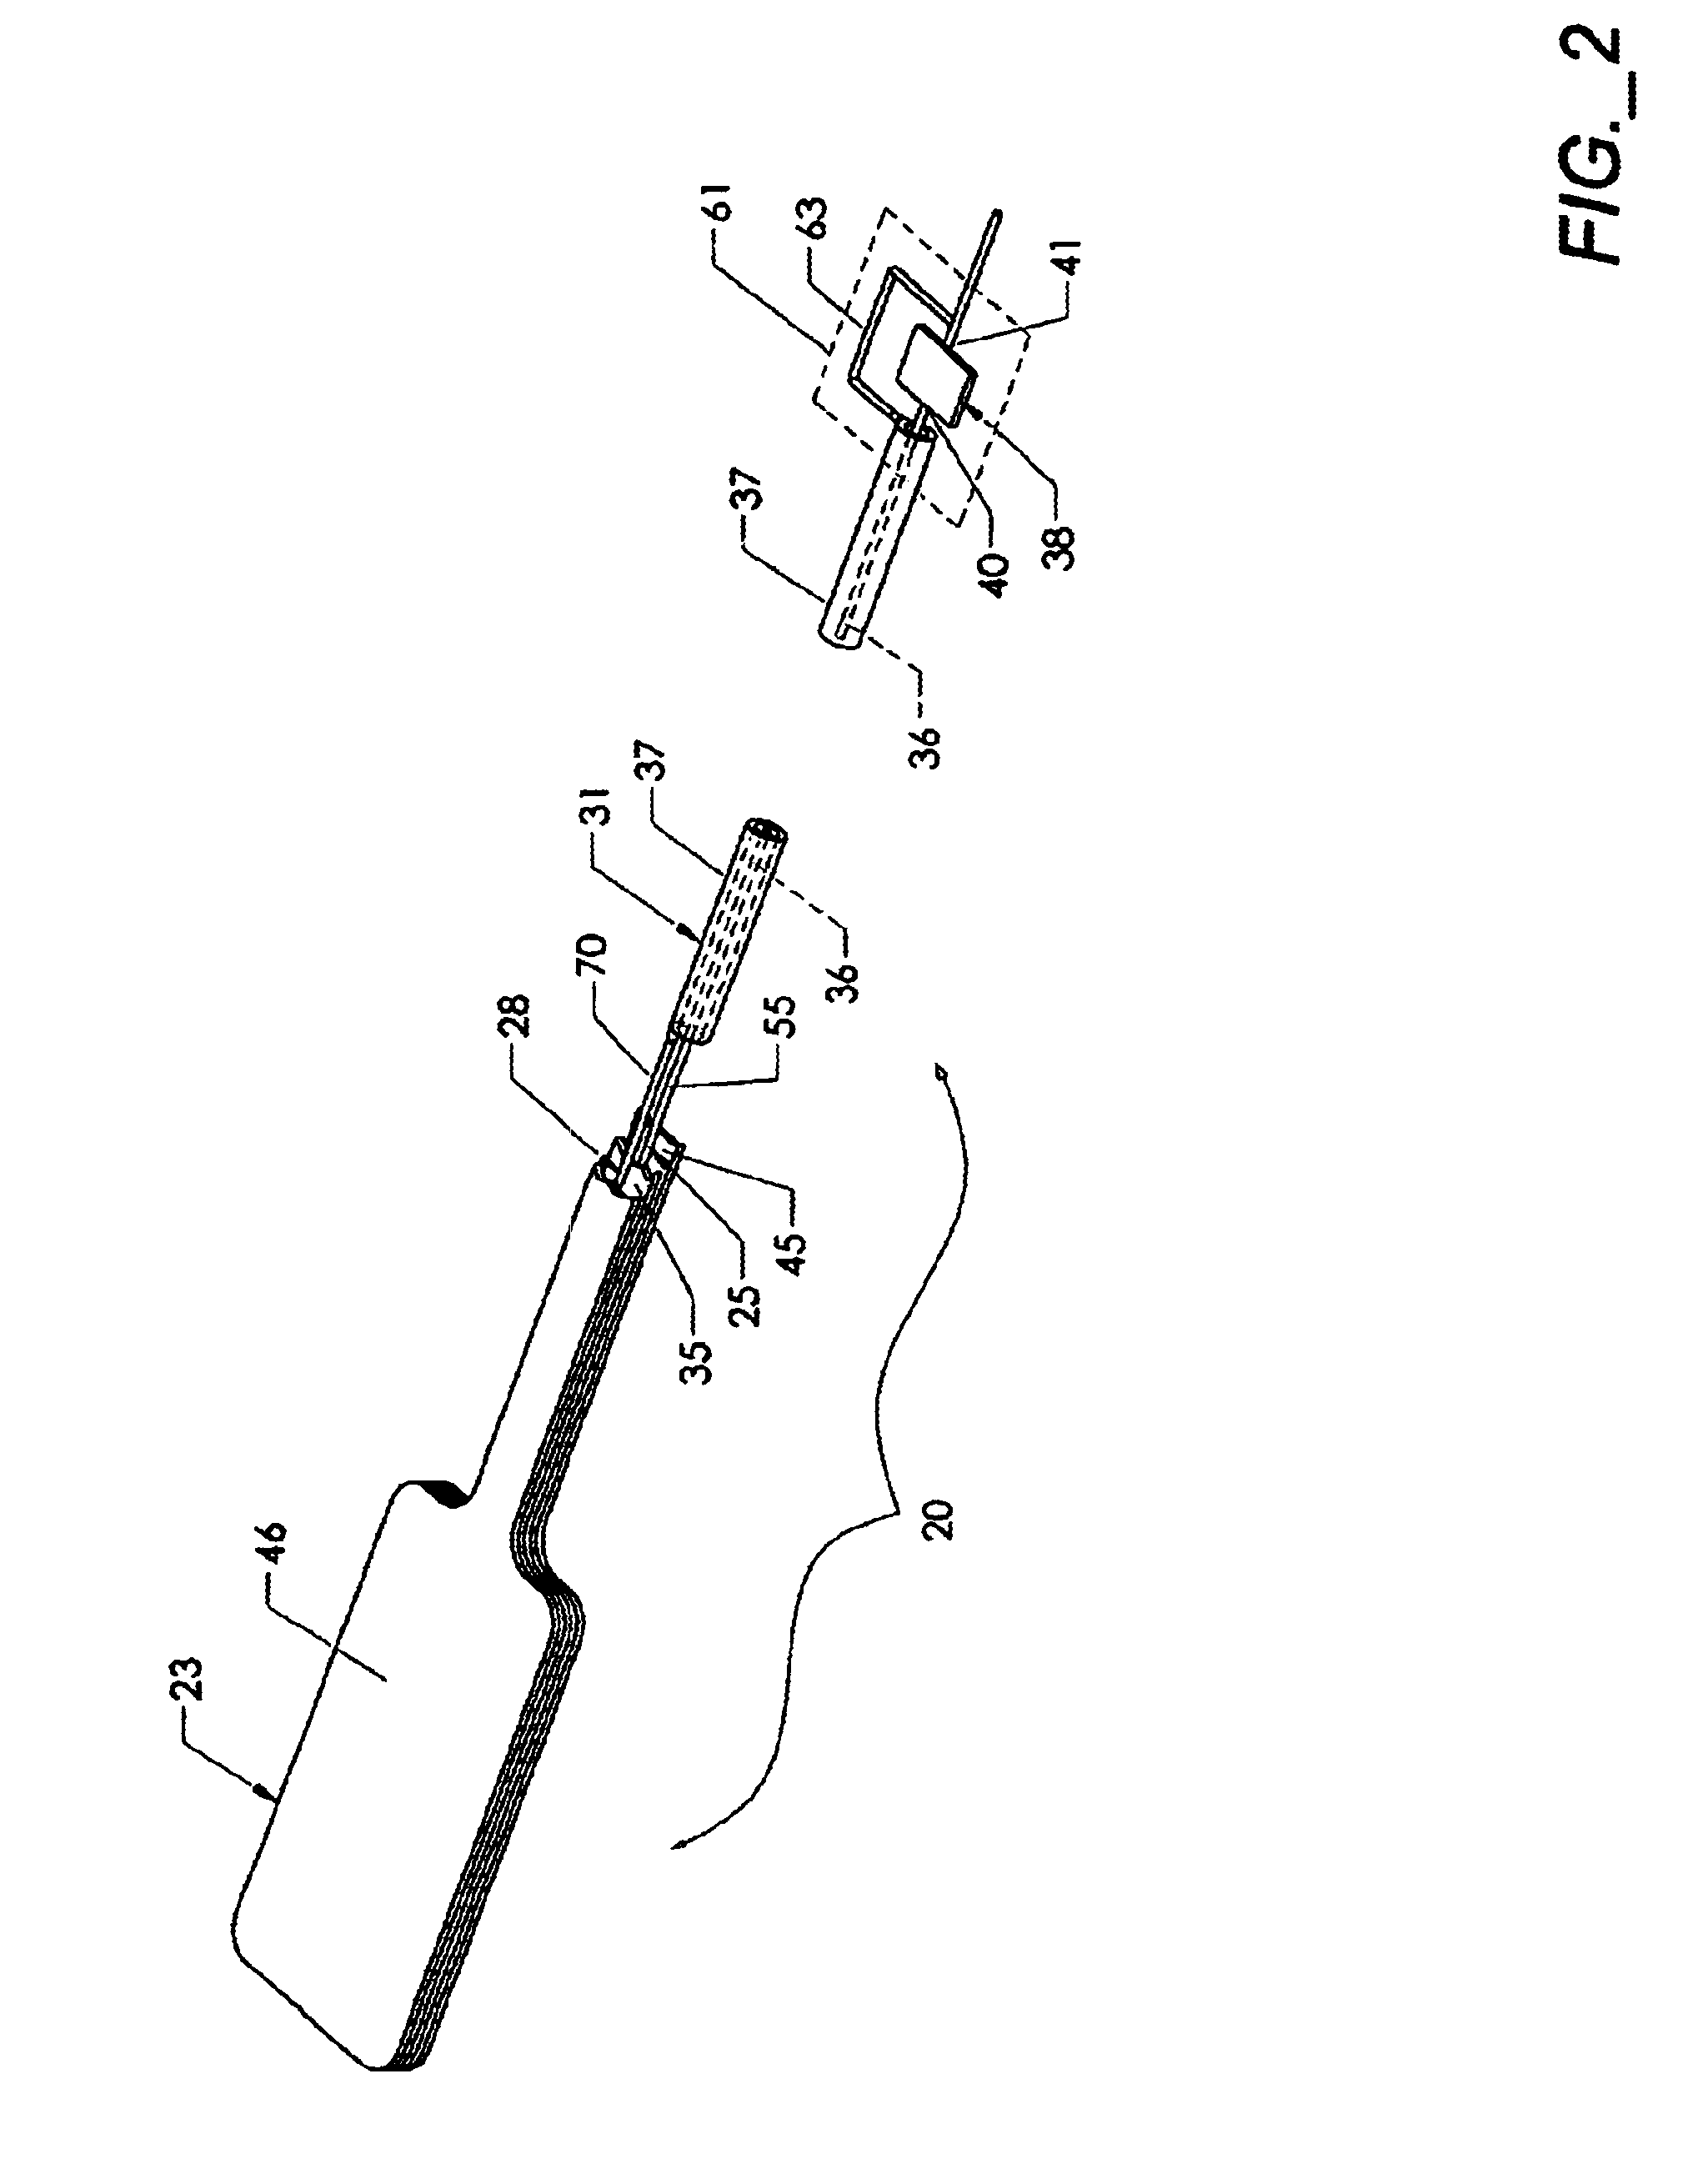 Surface electromyographic electrode assembly